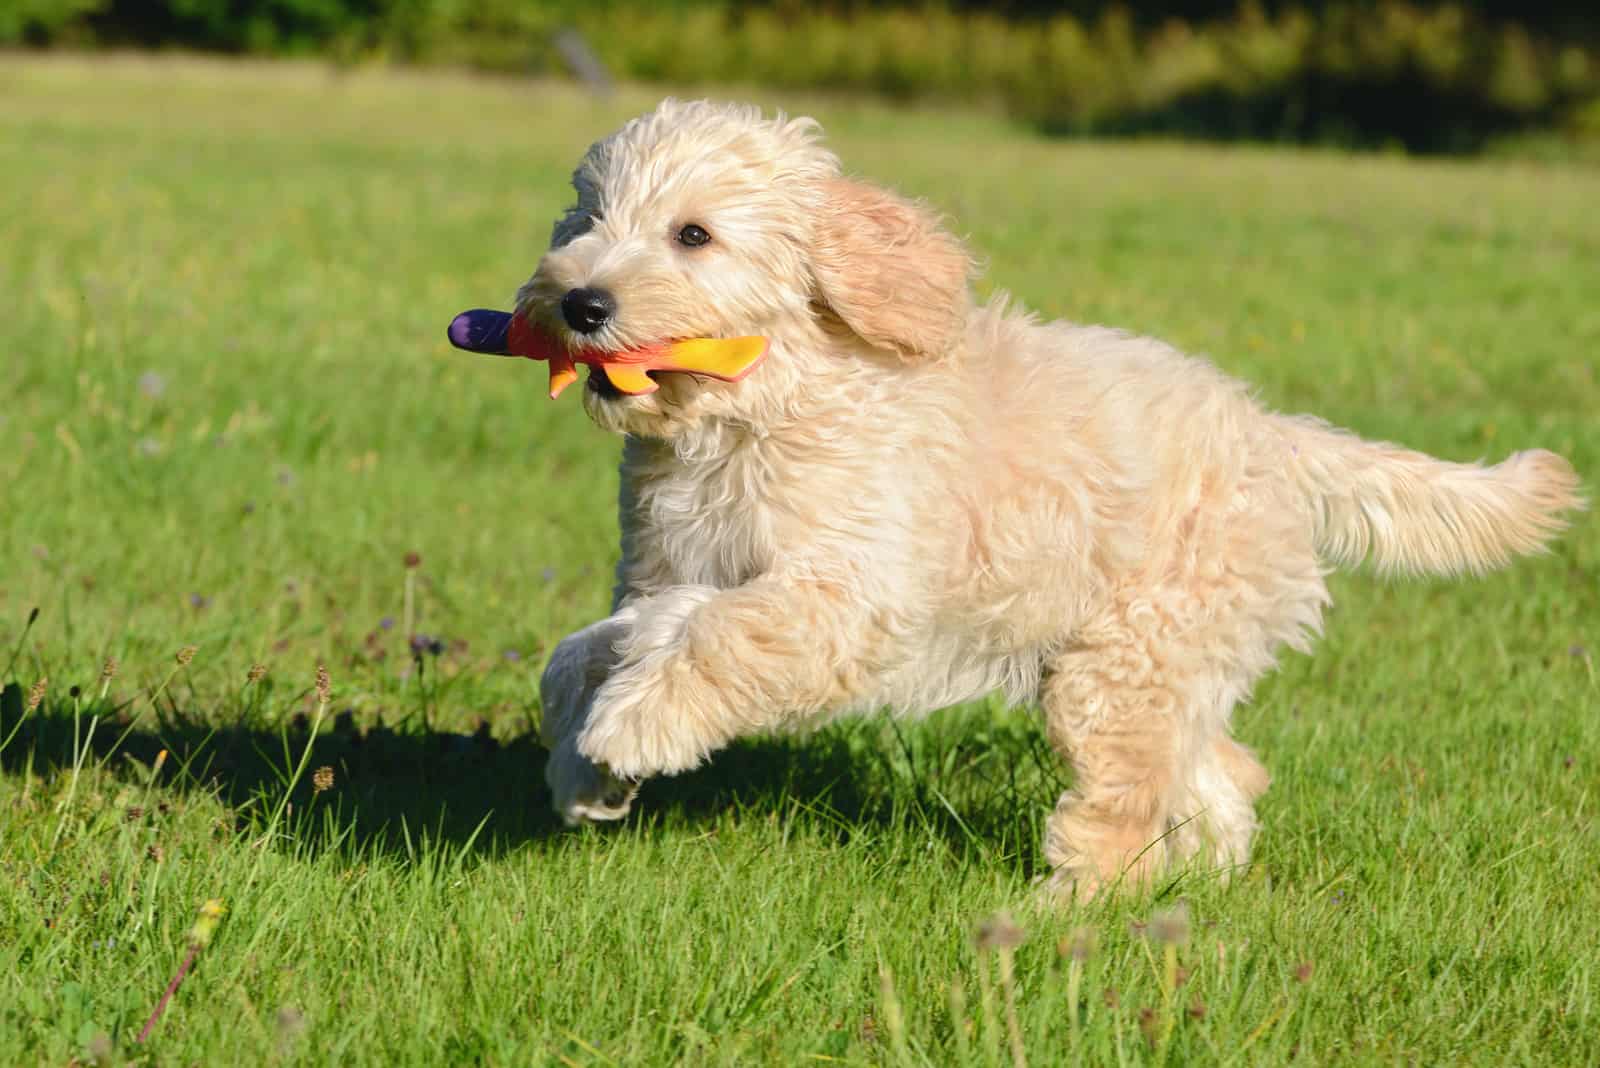 Goldendoodle Dog puppy runs with a toy in his mouth